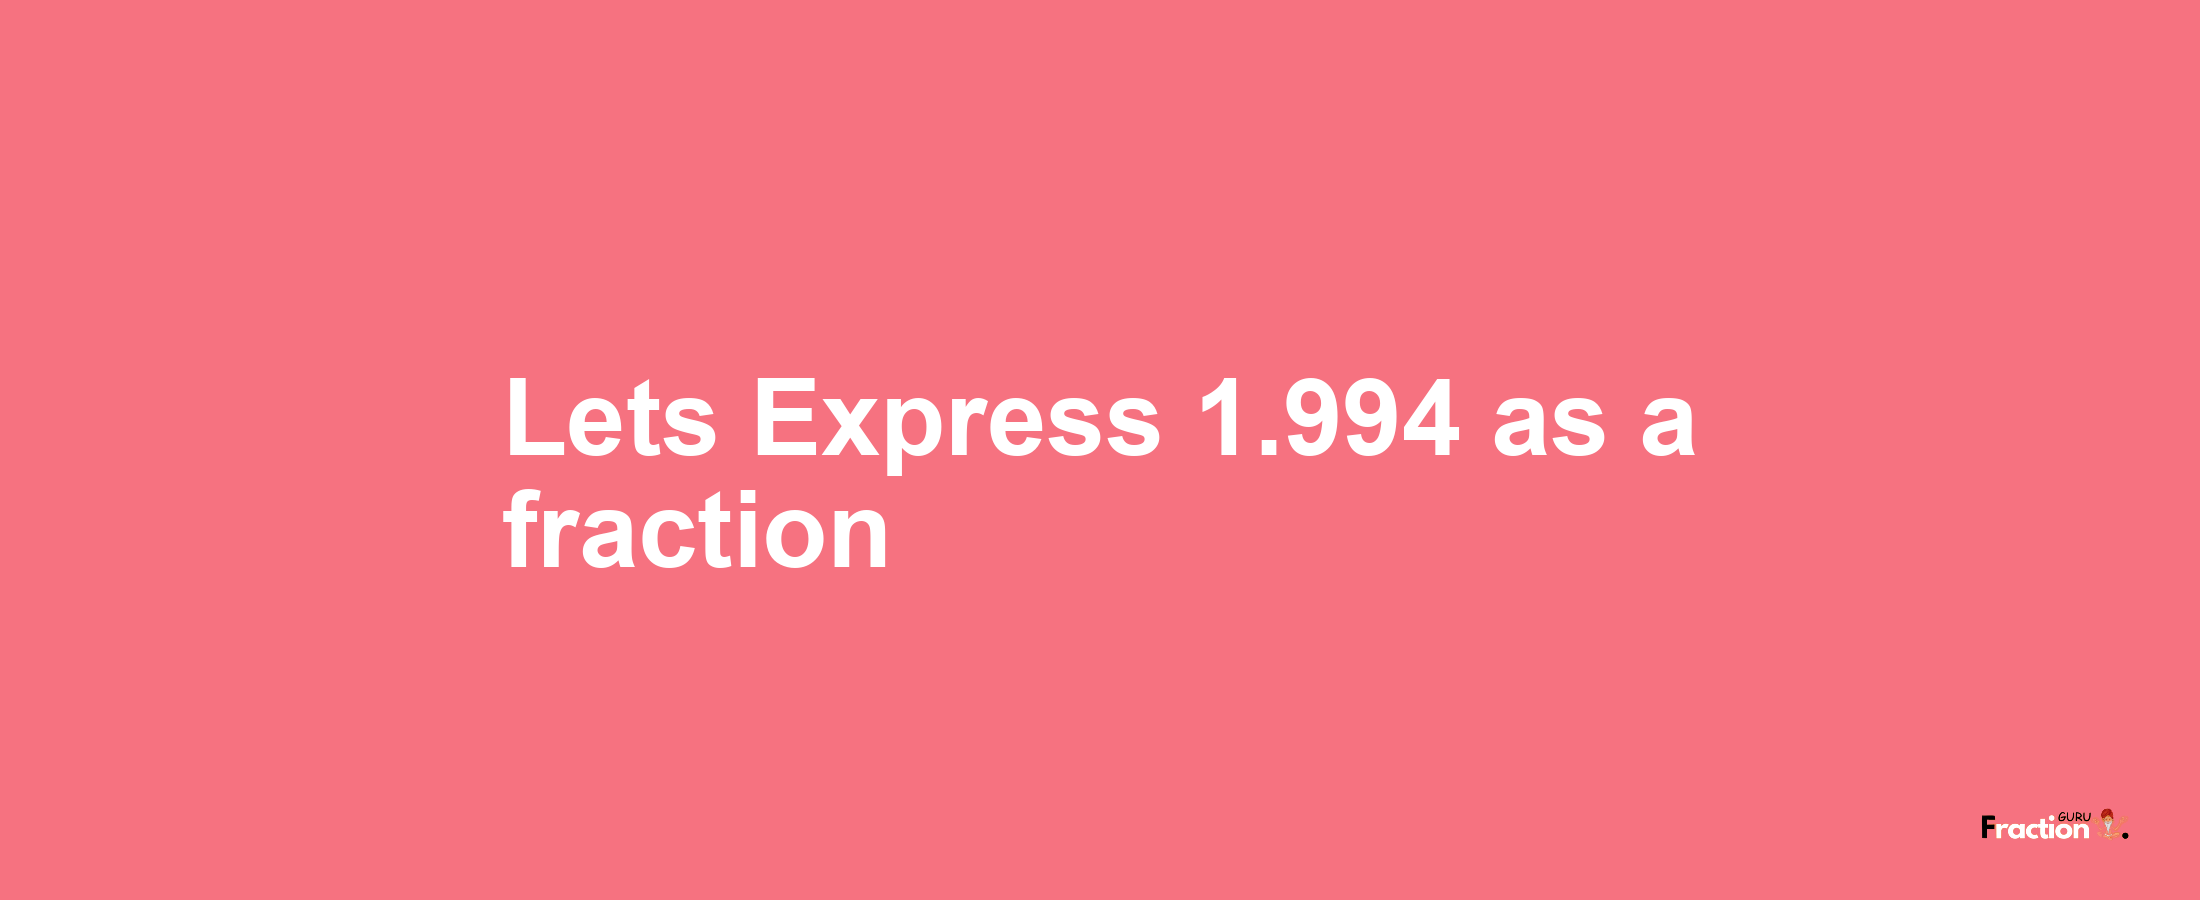 Lets Express 1.994 as afraction